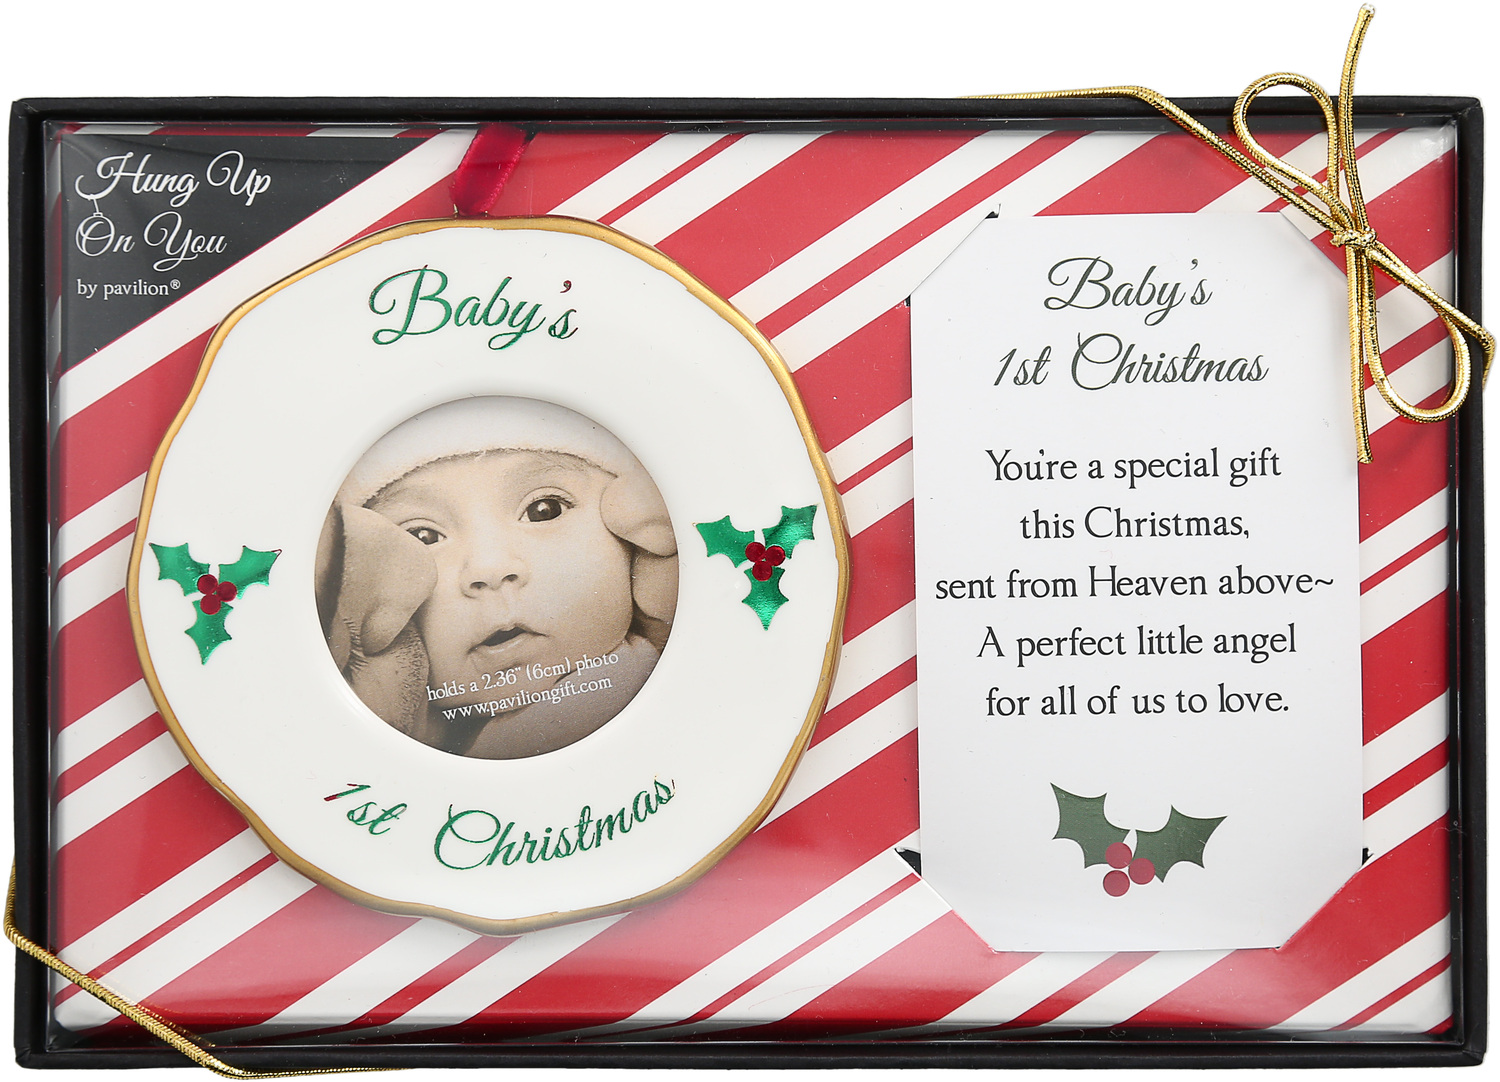 1st Christmas by Hung Up on You - 1st Christmas - 4" Photo Frame Ornament
